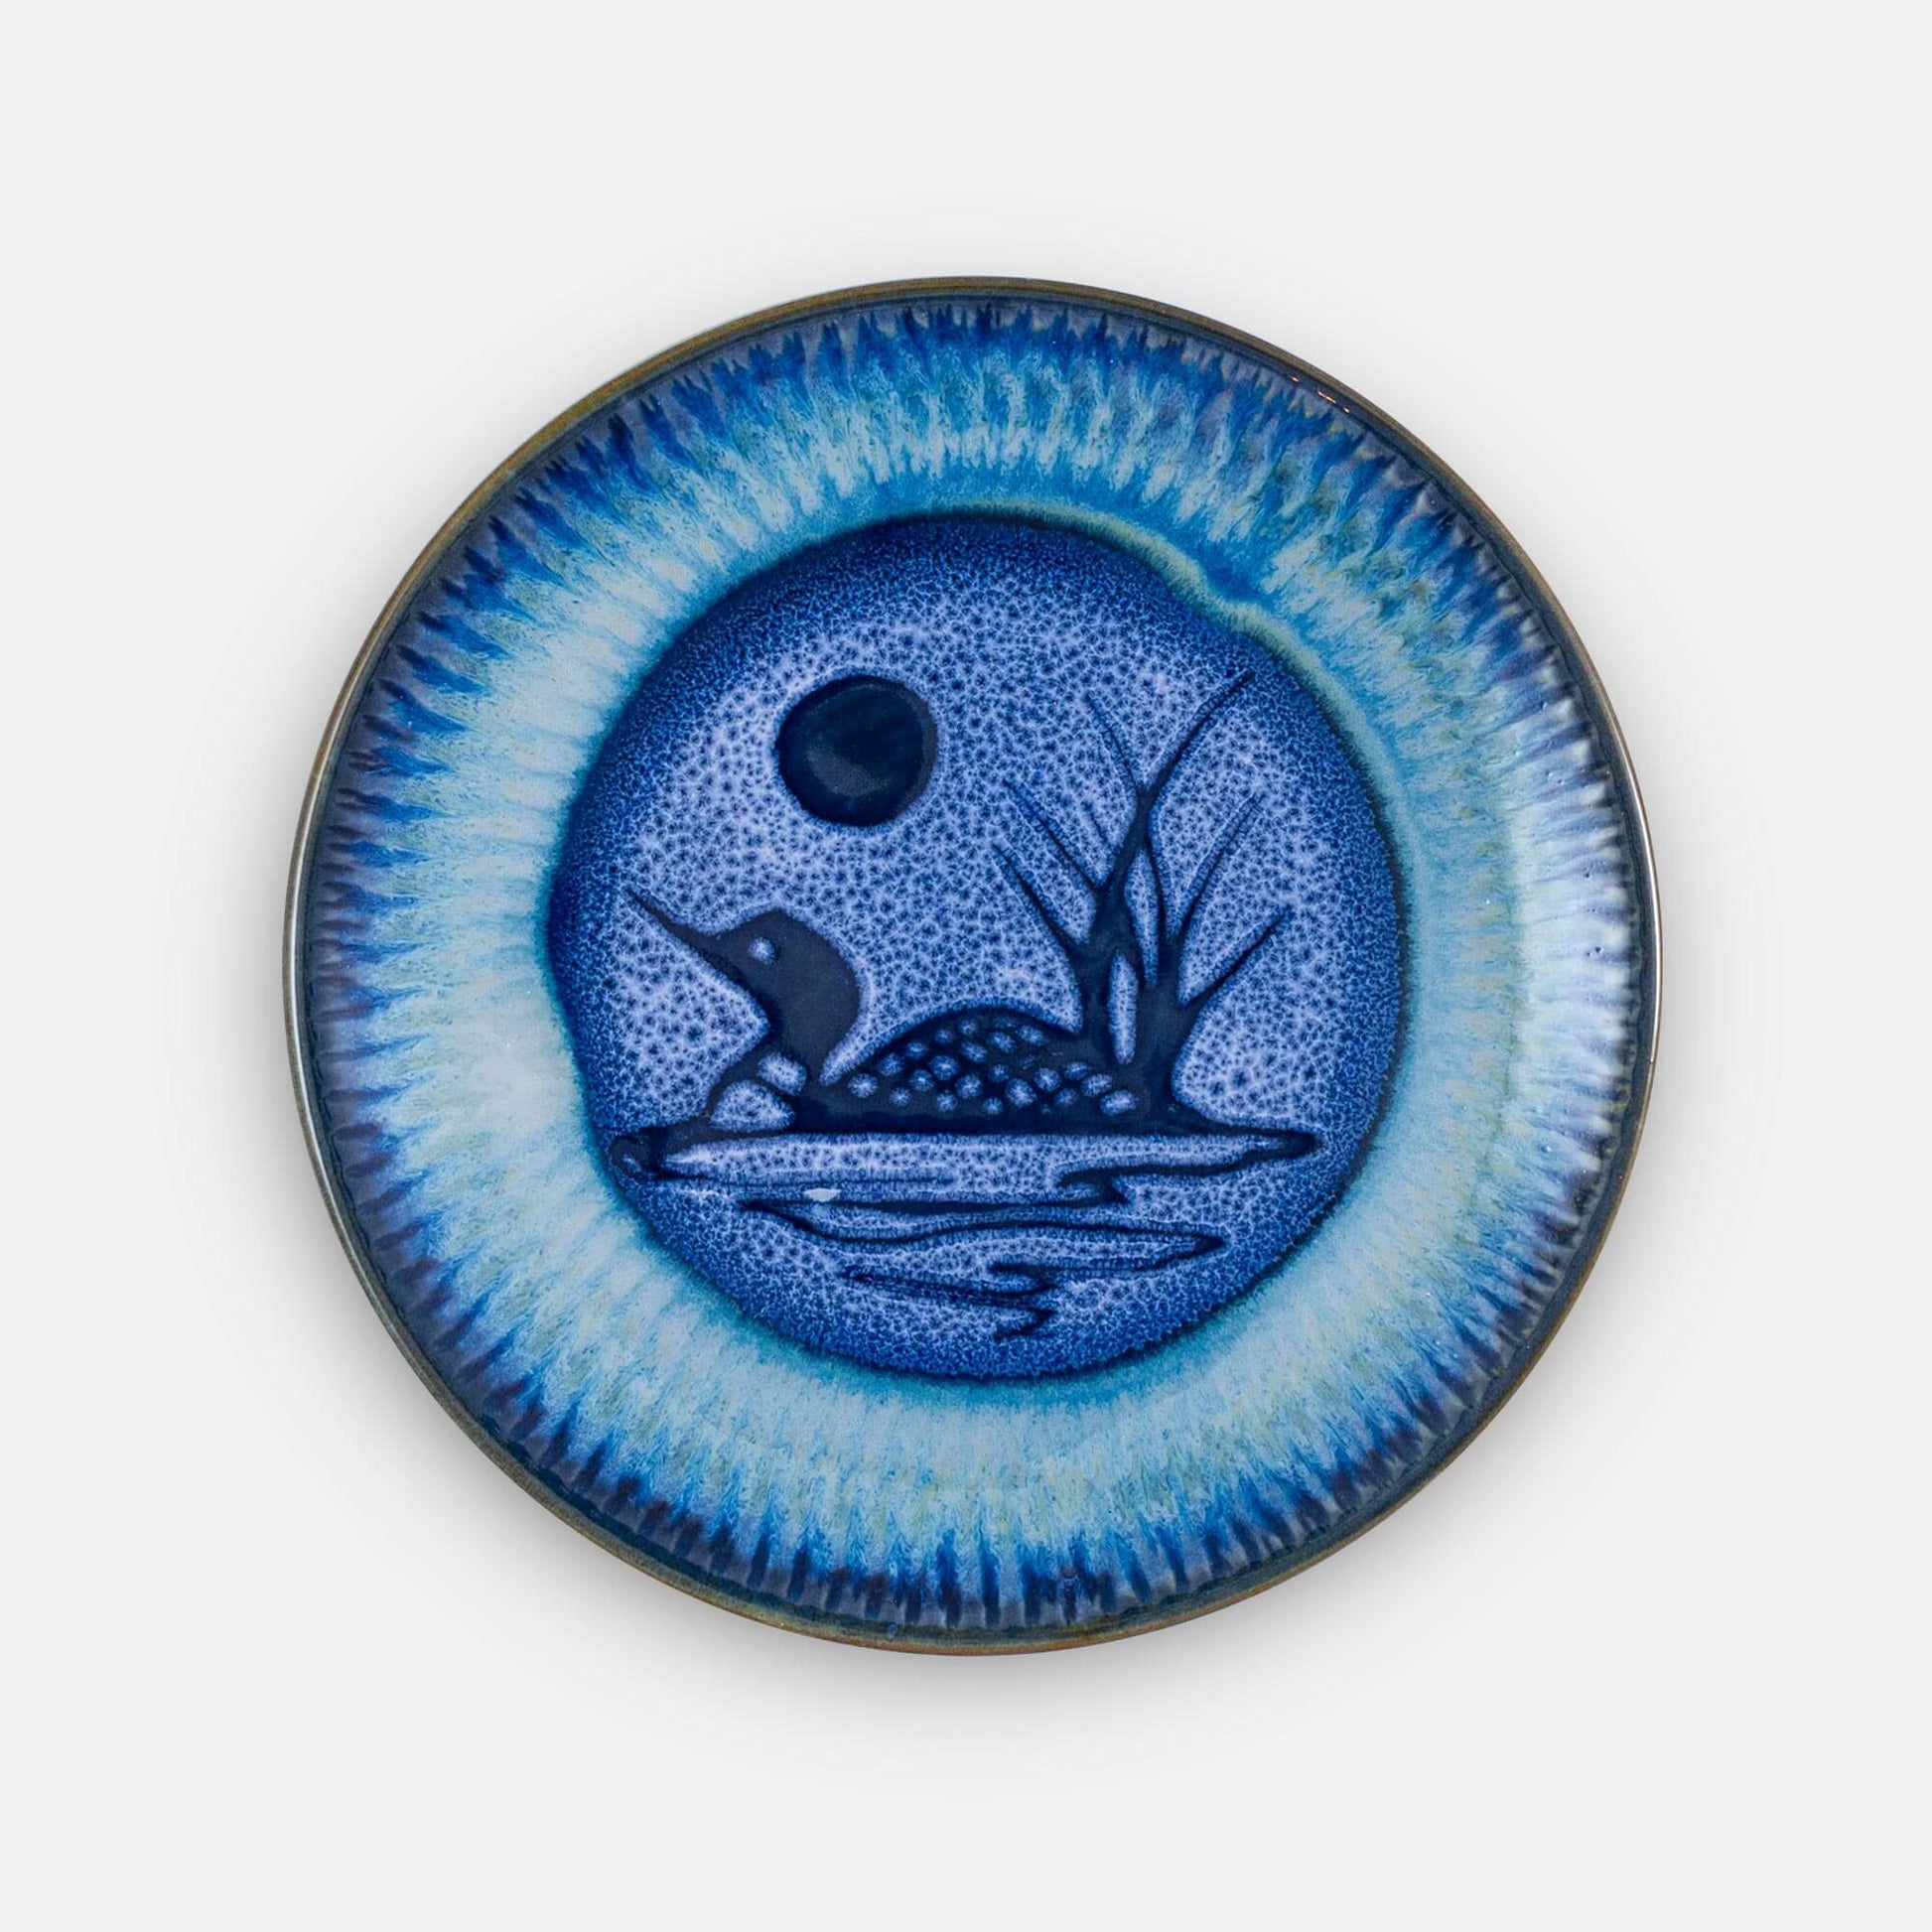 Handmade Pottery Rimless Dinner Plate made by Georgetown Pottery in Maine in Blue Loon pattern